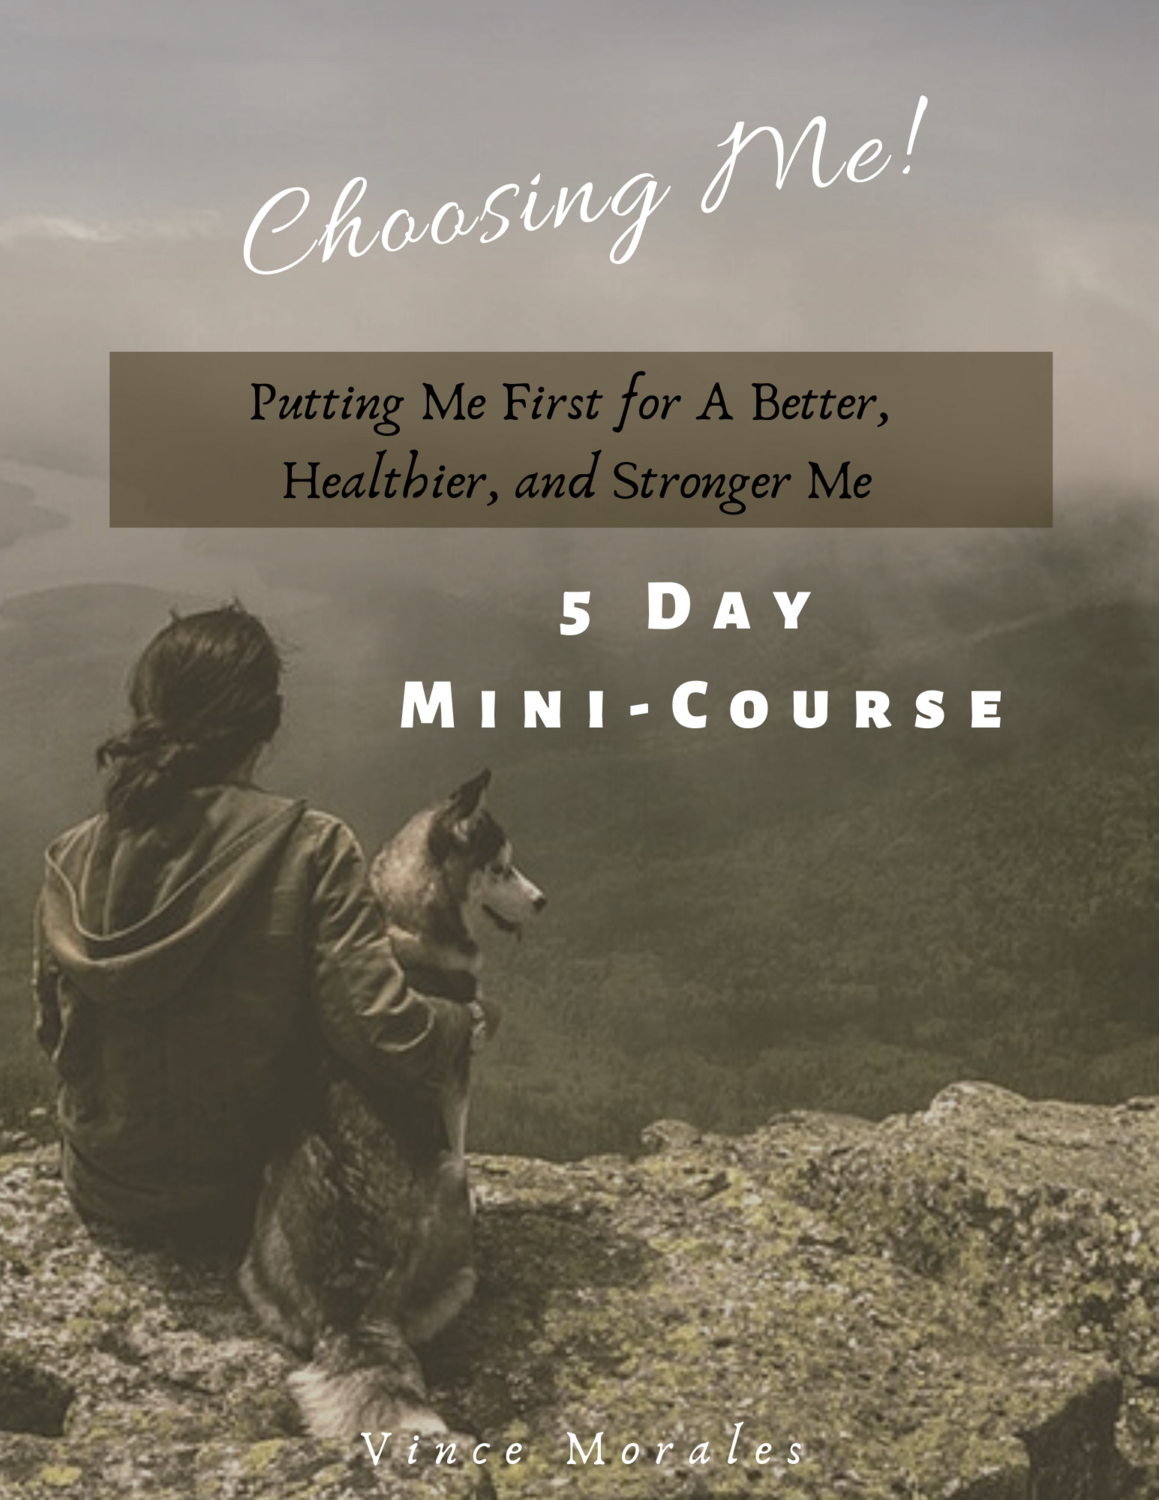 Choosing Me 5 Day Mini Course by Vince Morales